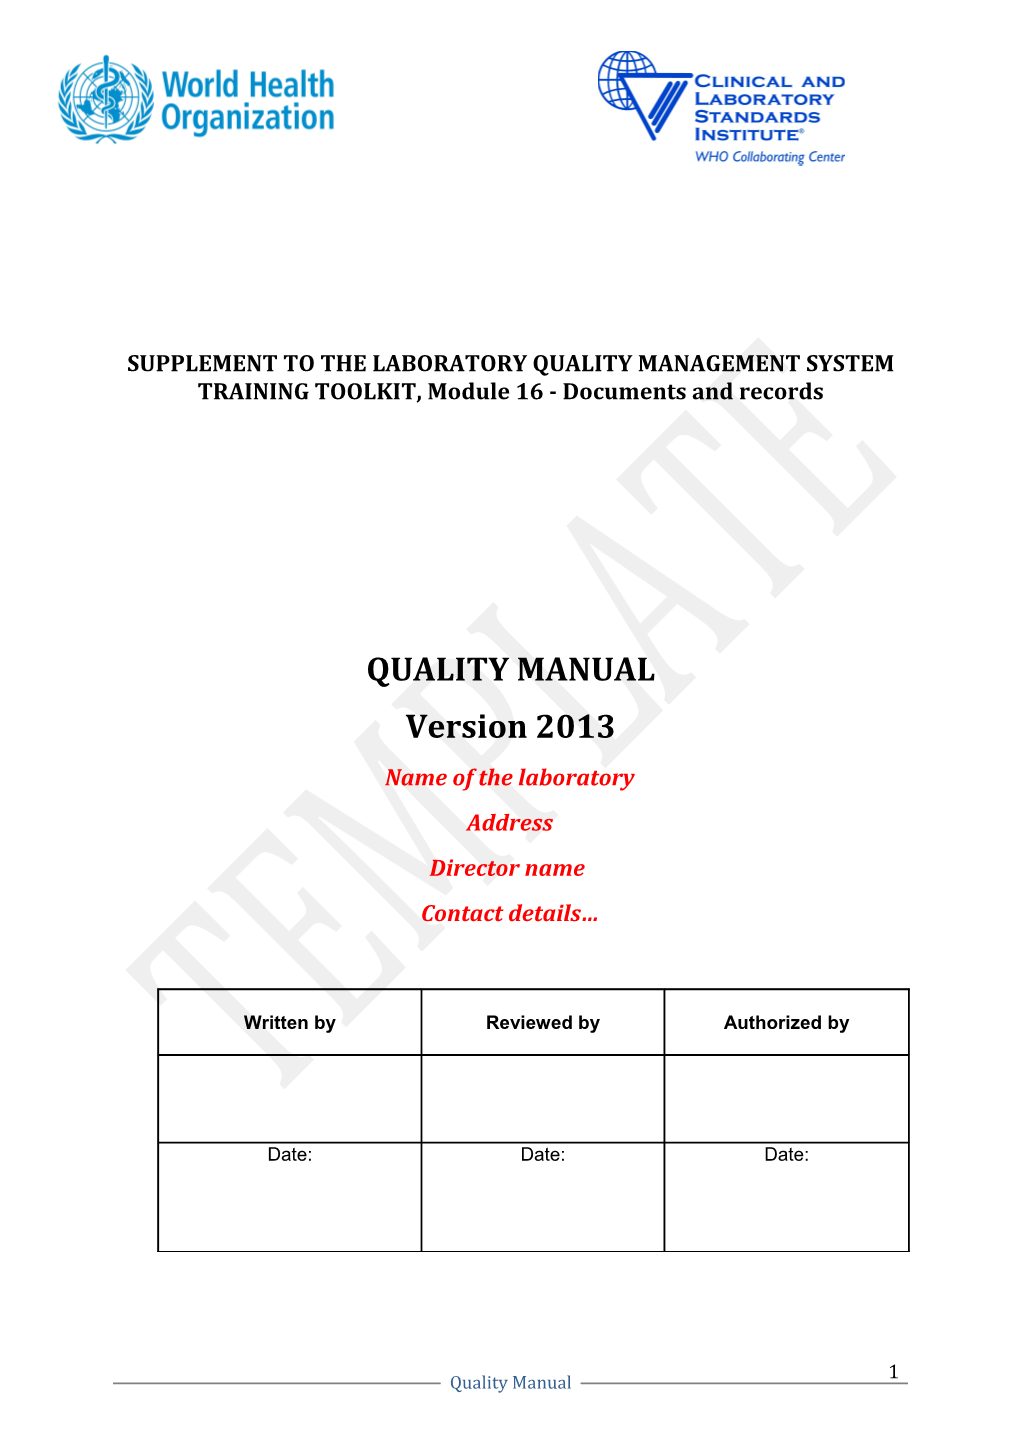 SUPPLEMENT to the LABORATORY QUALITY MANAGEMENT SYSTEM TRAINING TOOLKIT, Module 16 - Documents